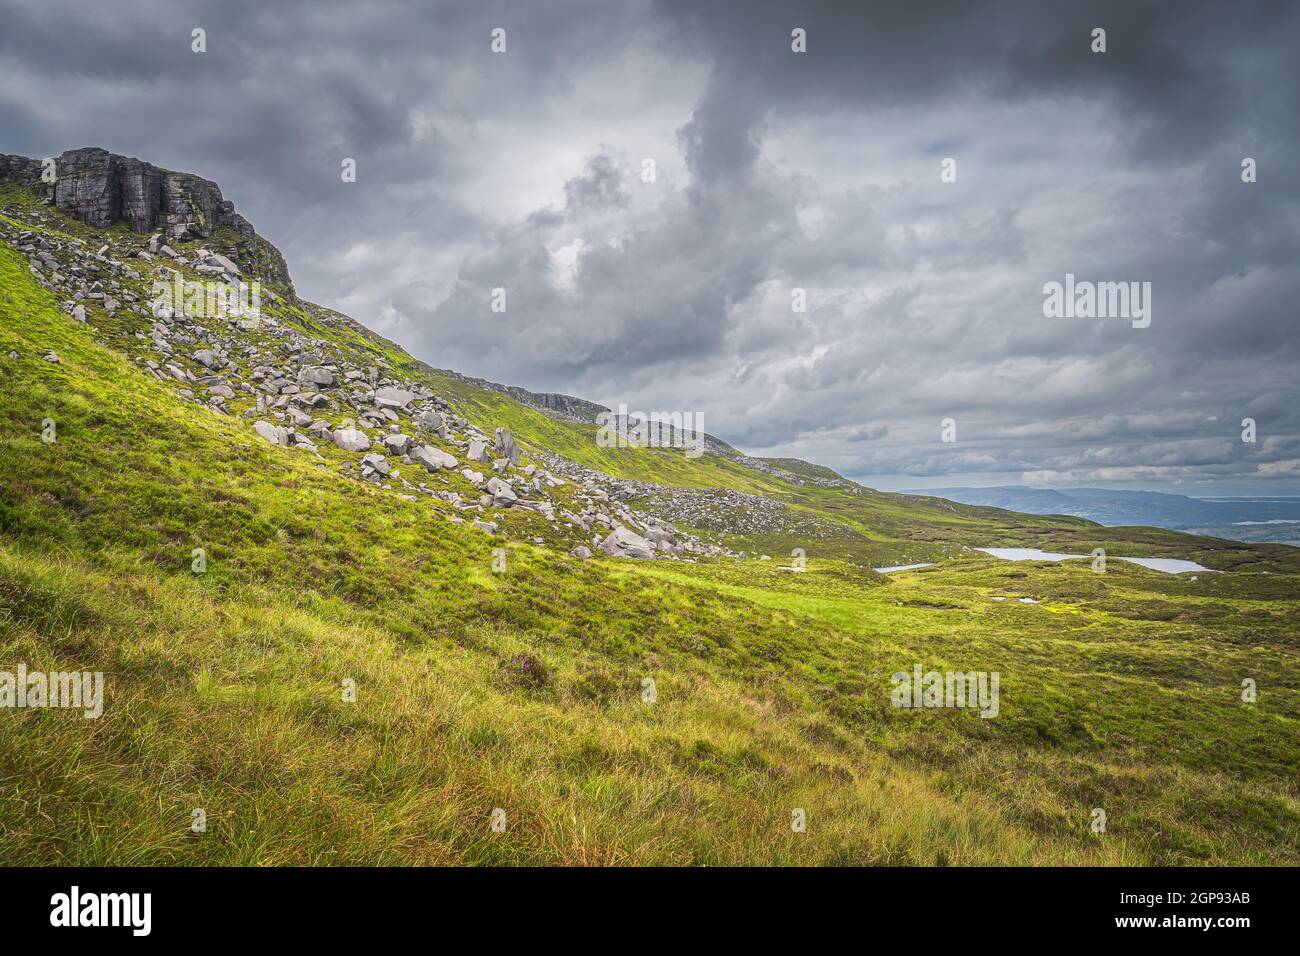 Green, long grass, large boulders and rubble on Cuilcagh Mountain mountainside with small lakes in valley below, Northern Ireland Stock Photo